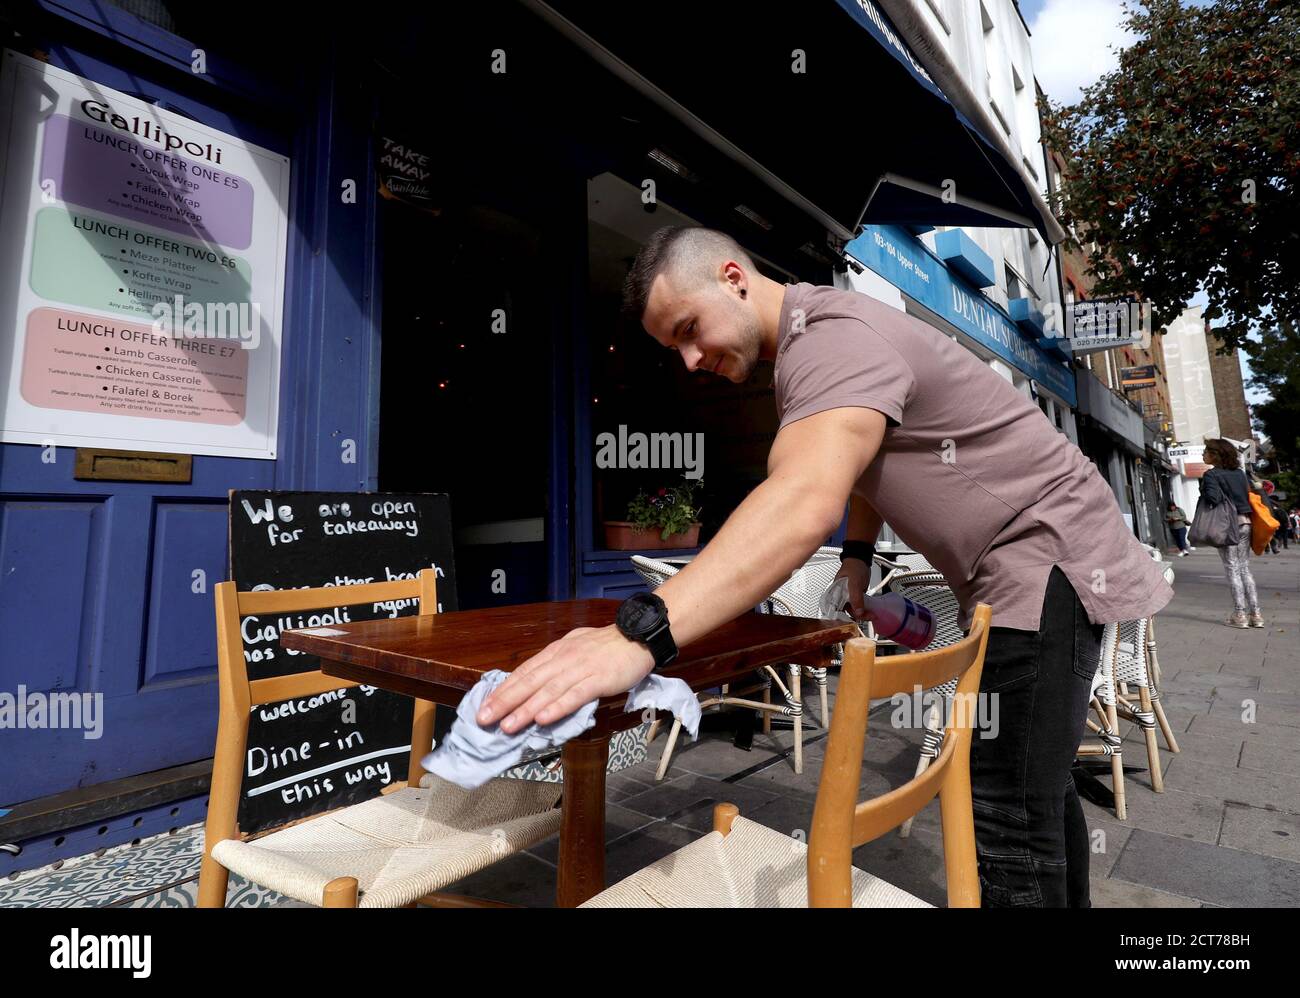 A member of staff cleans the tables outside the Gallipoli restaurant on Upper Street in Islington, North London. Stock Photo